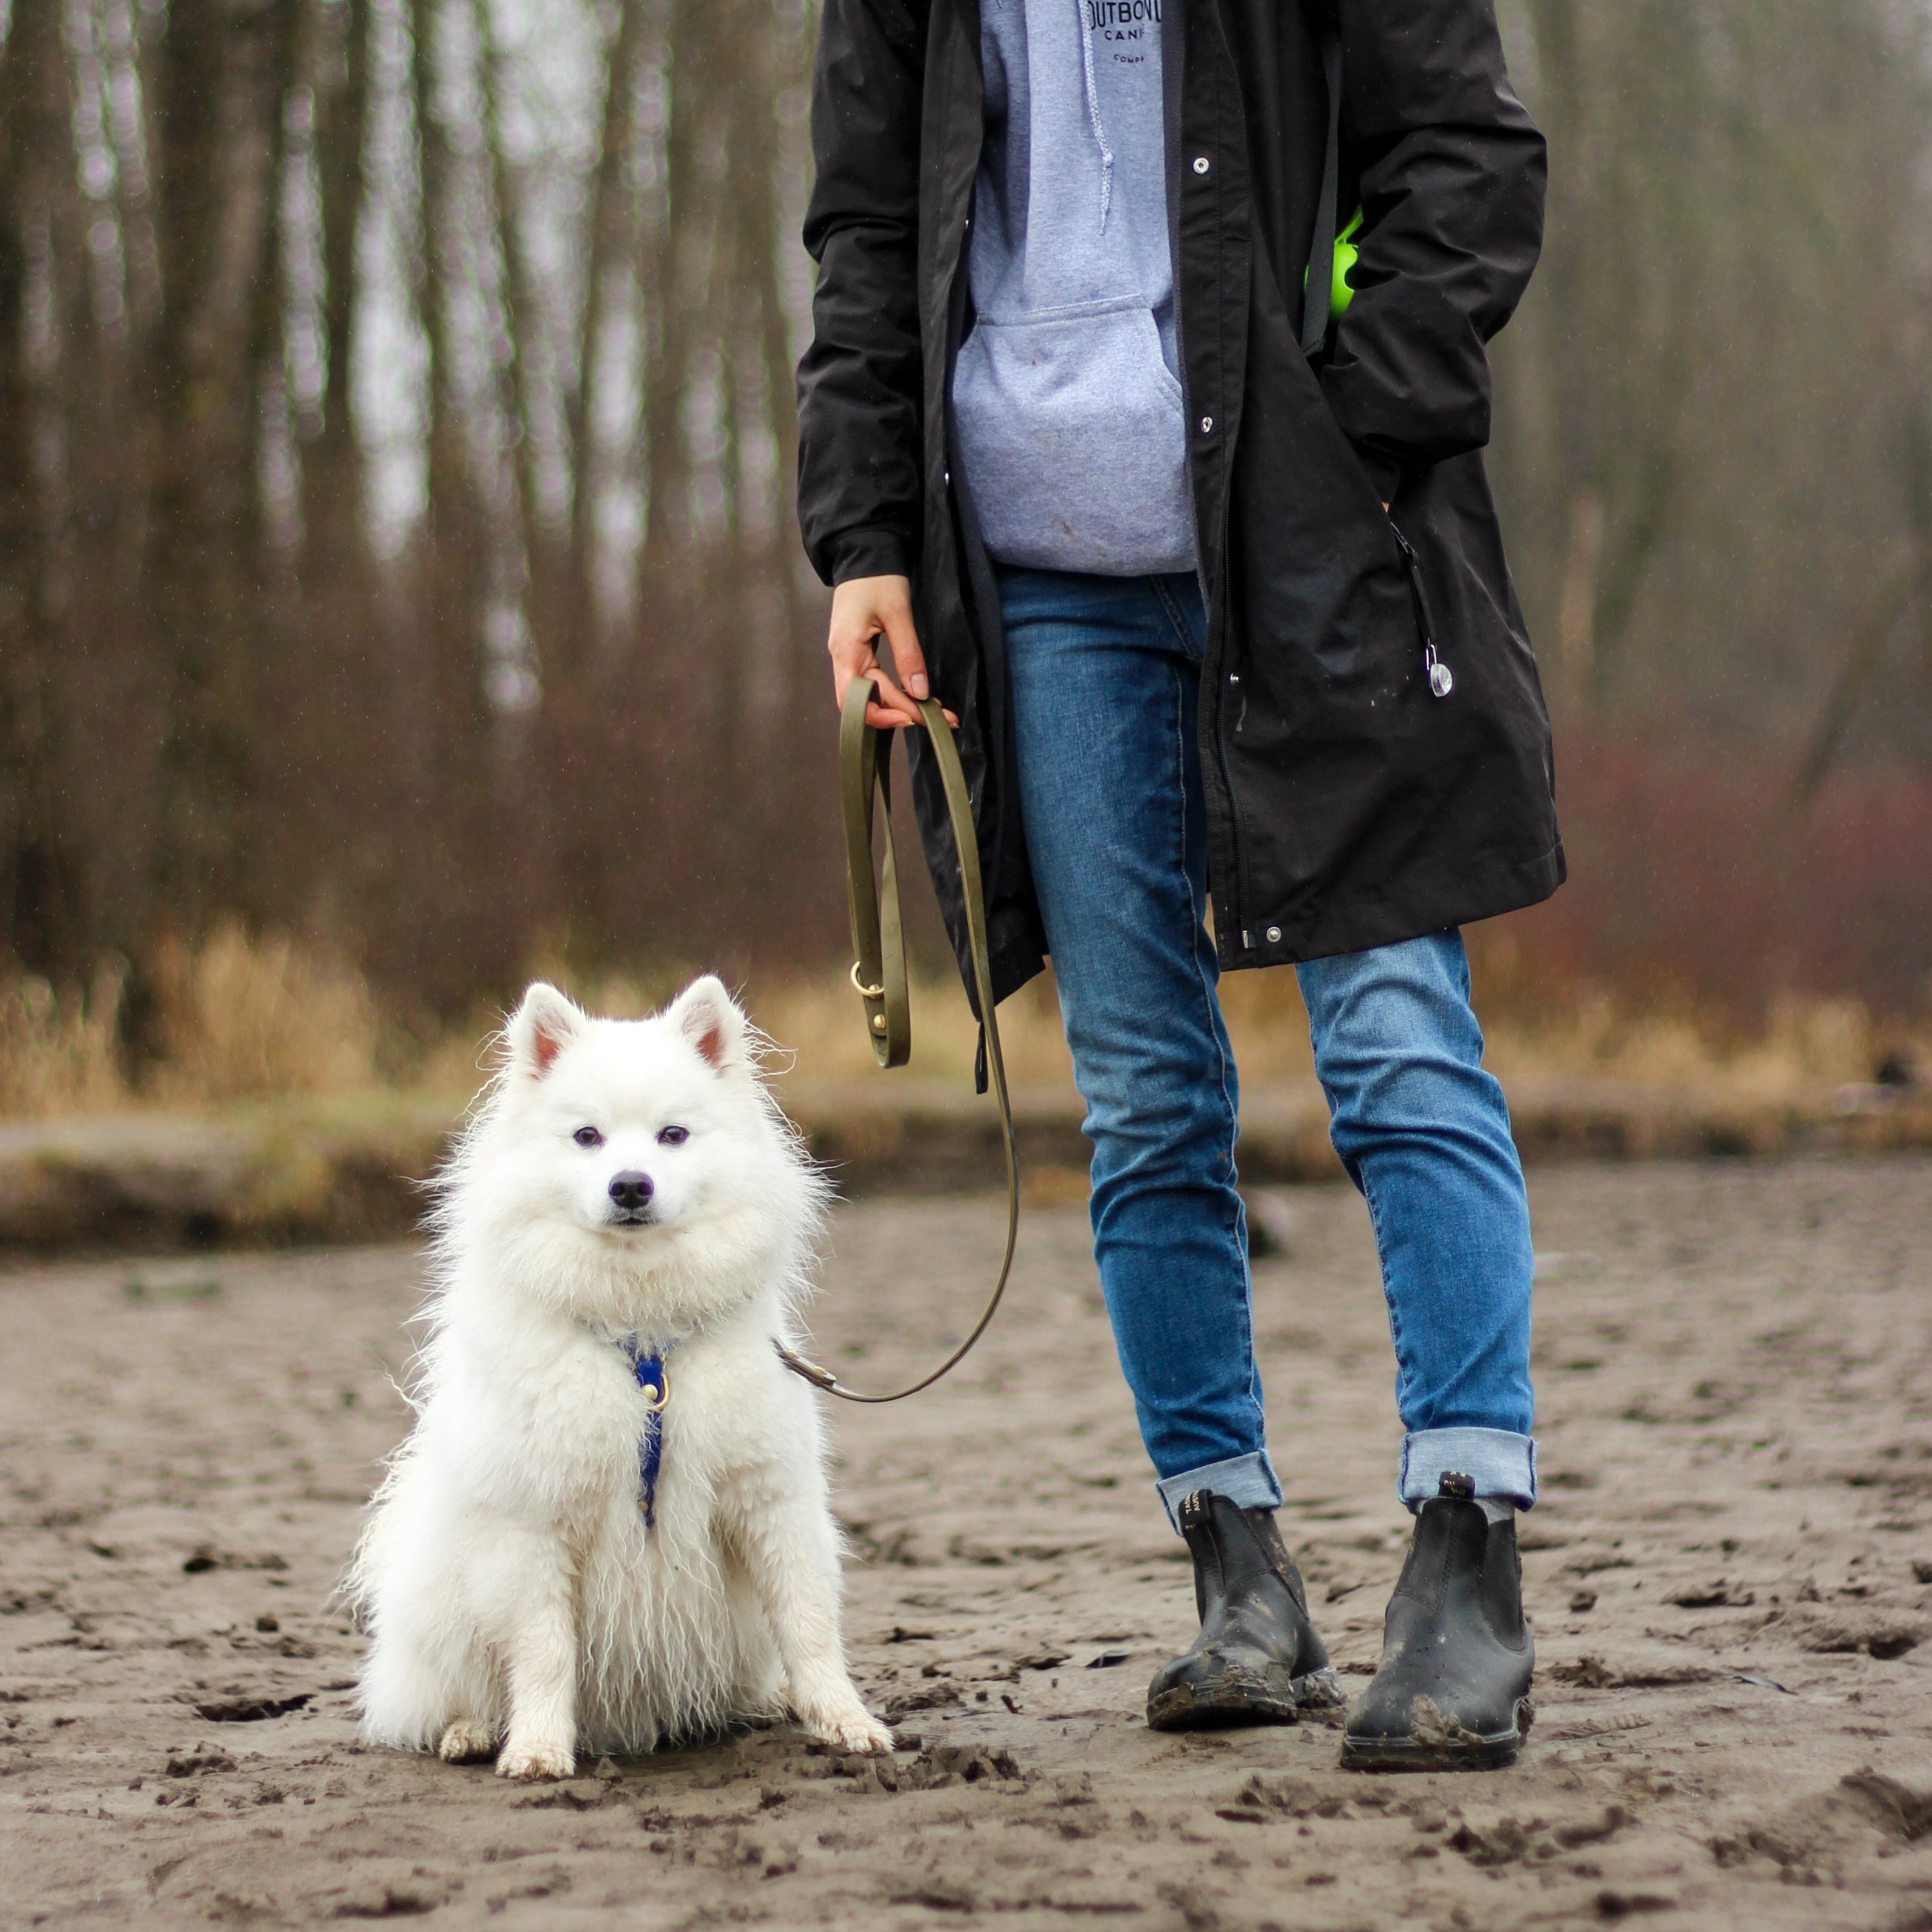 Eskimo Dog and Owner standing on a beach